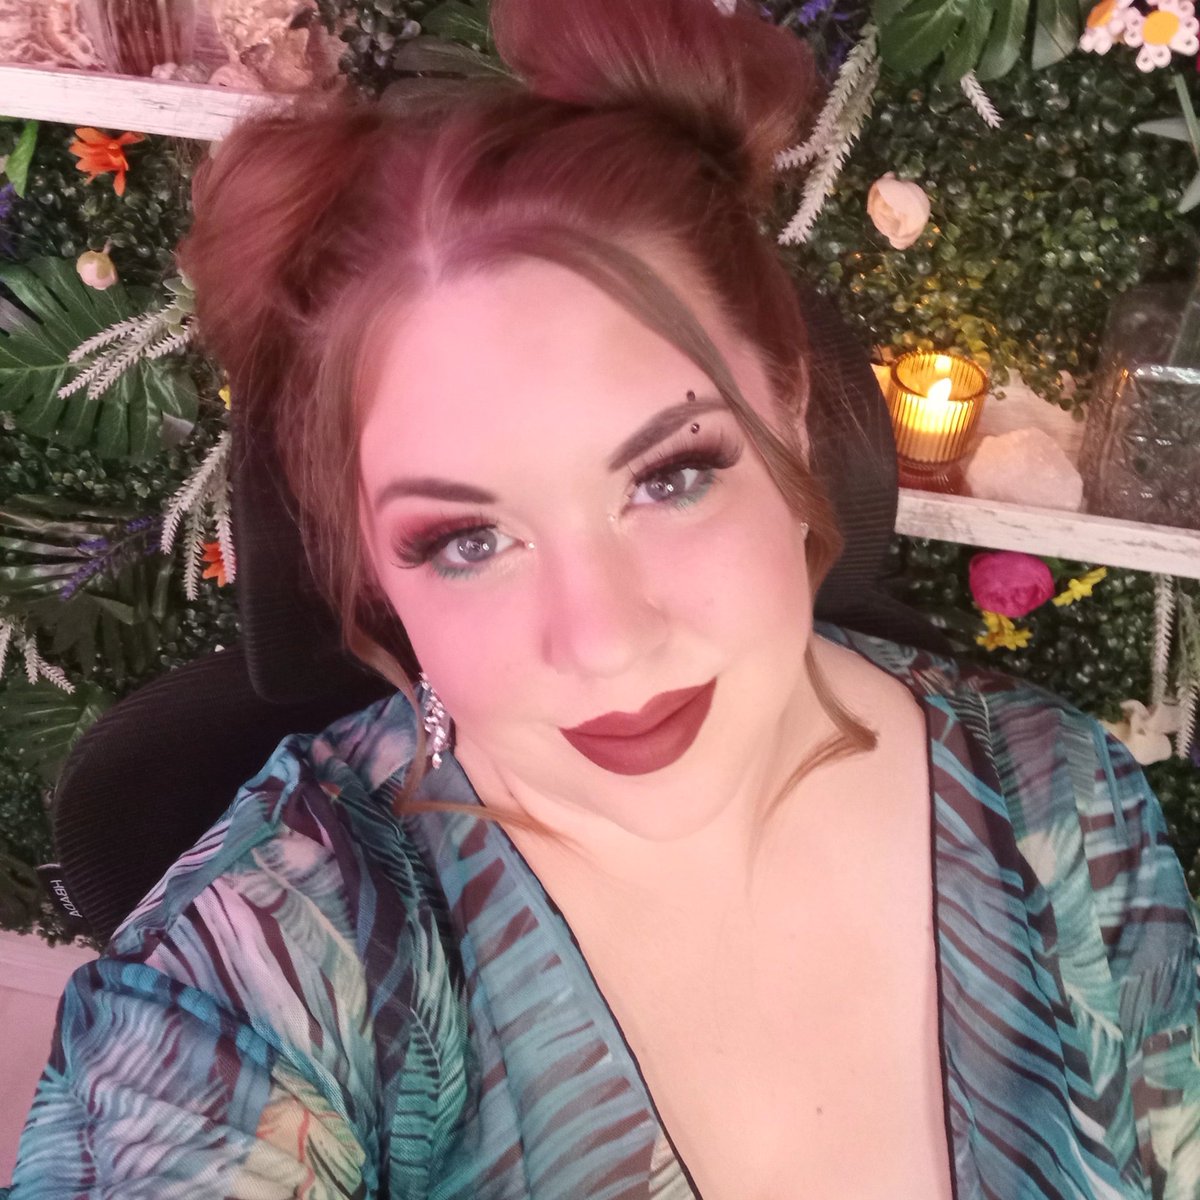 🥳Playing DBD today! 👖💨Yeet your pants and grab a drink!🤩

🌺Live right now on twitch.tv/brittars🌺

#deadbydaylight #deadbydaylightsurvivor #behaviour #playingwithviewers #twitchgirl #varietystreamer #twitch #twitchstreamer #makeuplook #nowlive #comehang #selfie